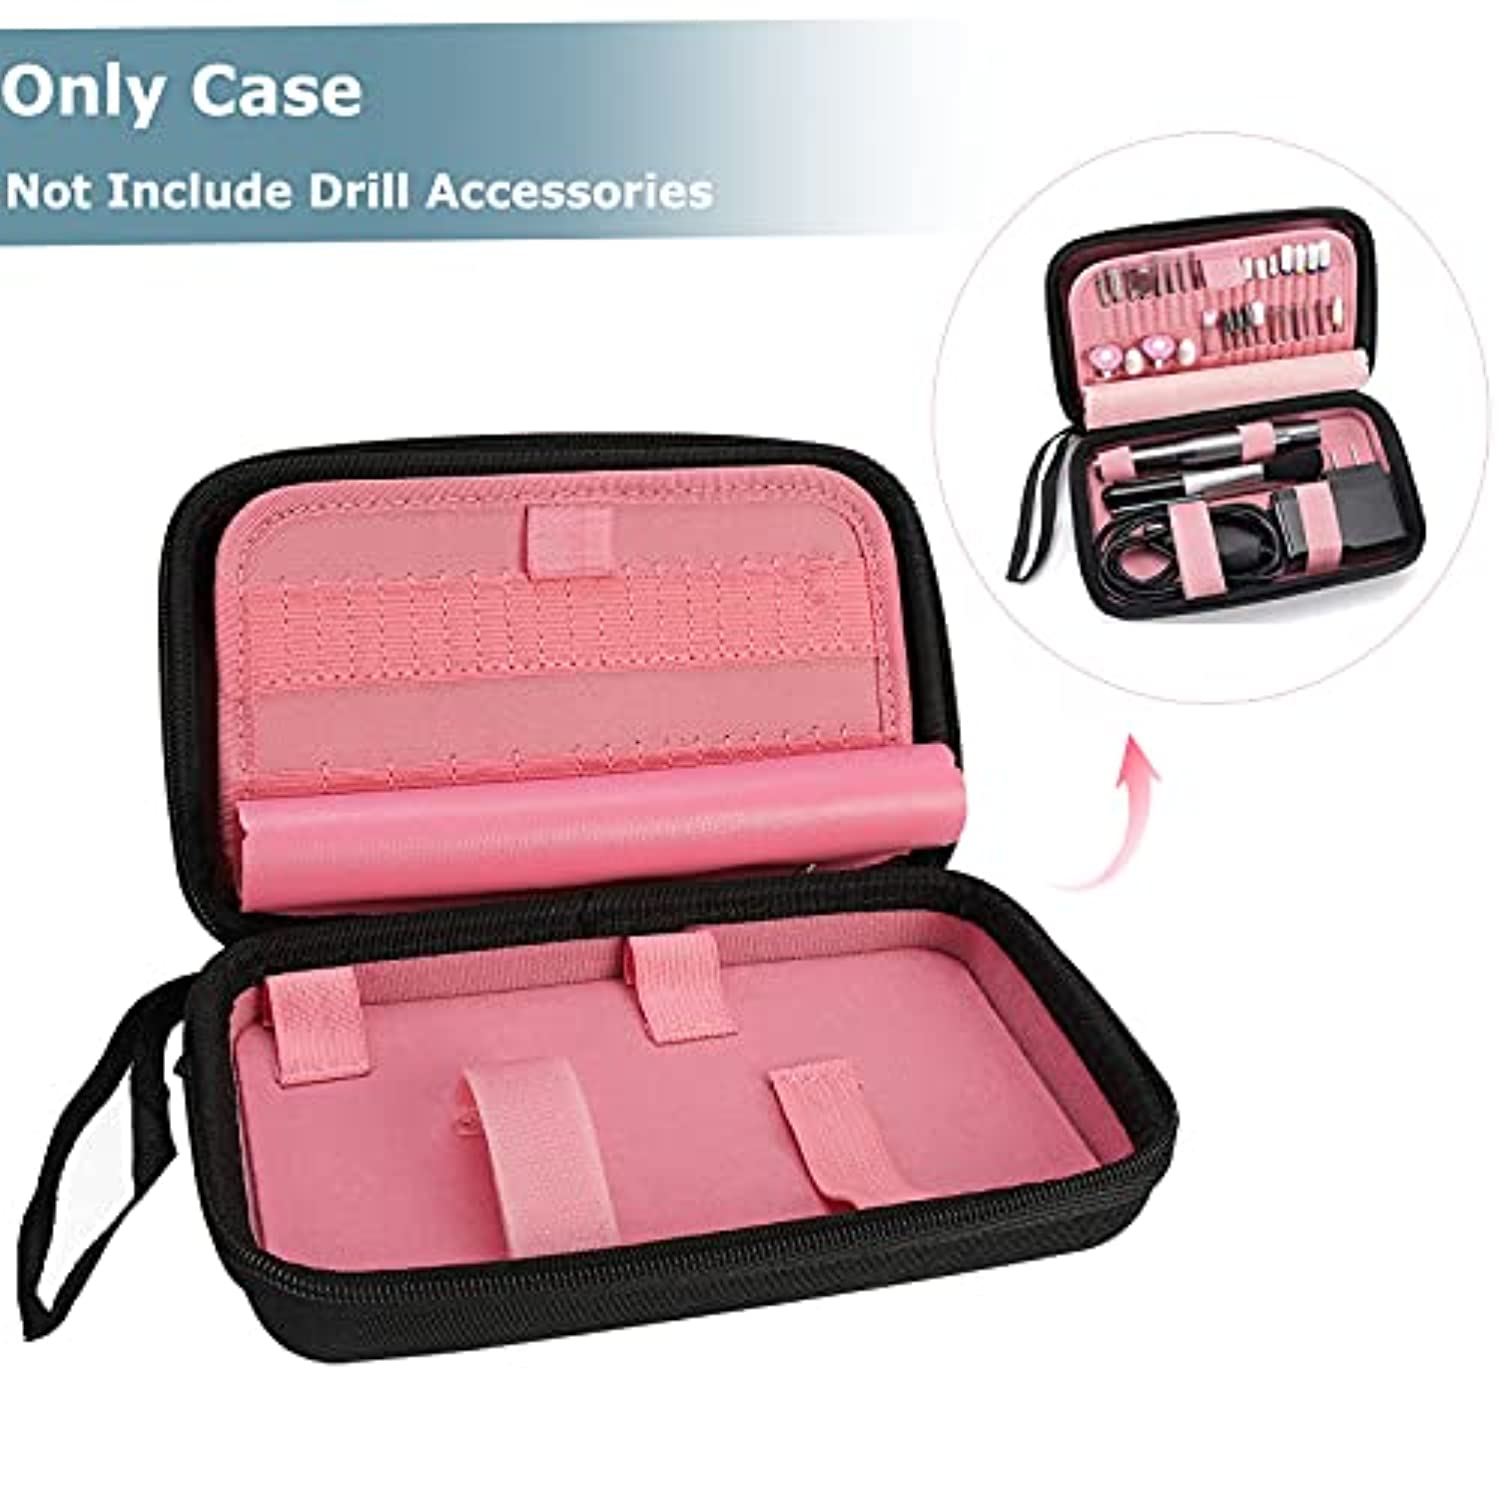 Electric Nail Drill Kit, YaFex Professional Acrylic Nail File Portable Manicure Pedicure Drill Set for Acrylic Gel Nails with False Nail Clipper, Drill Bits Kit and Sanding Bands with Nail Drill Case